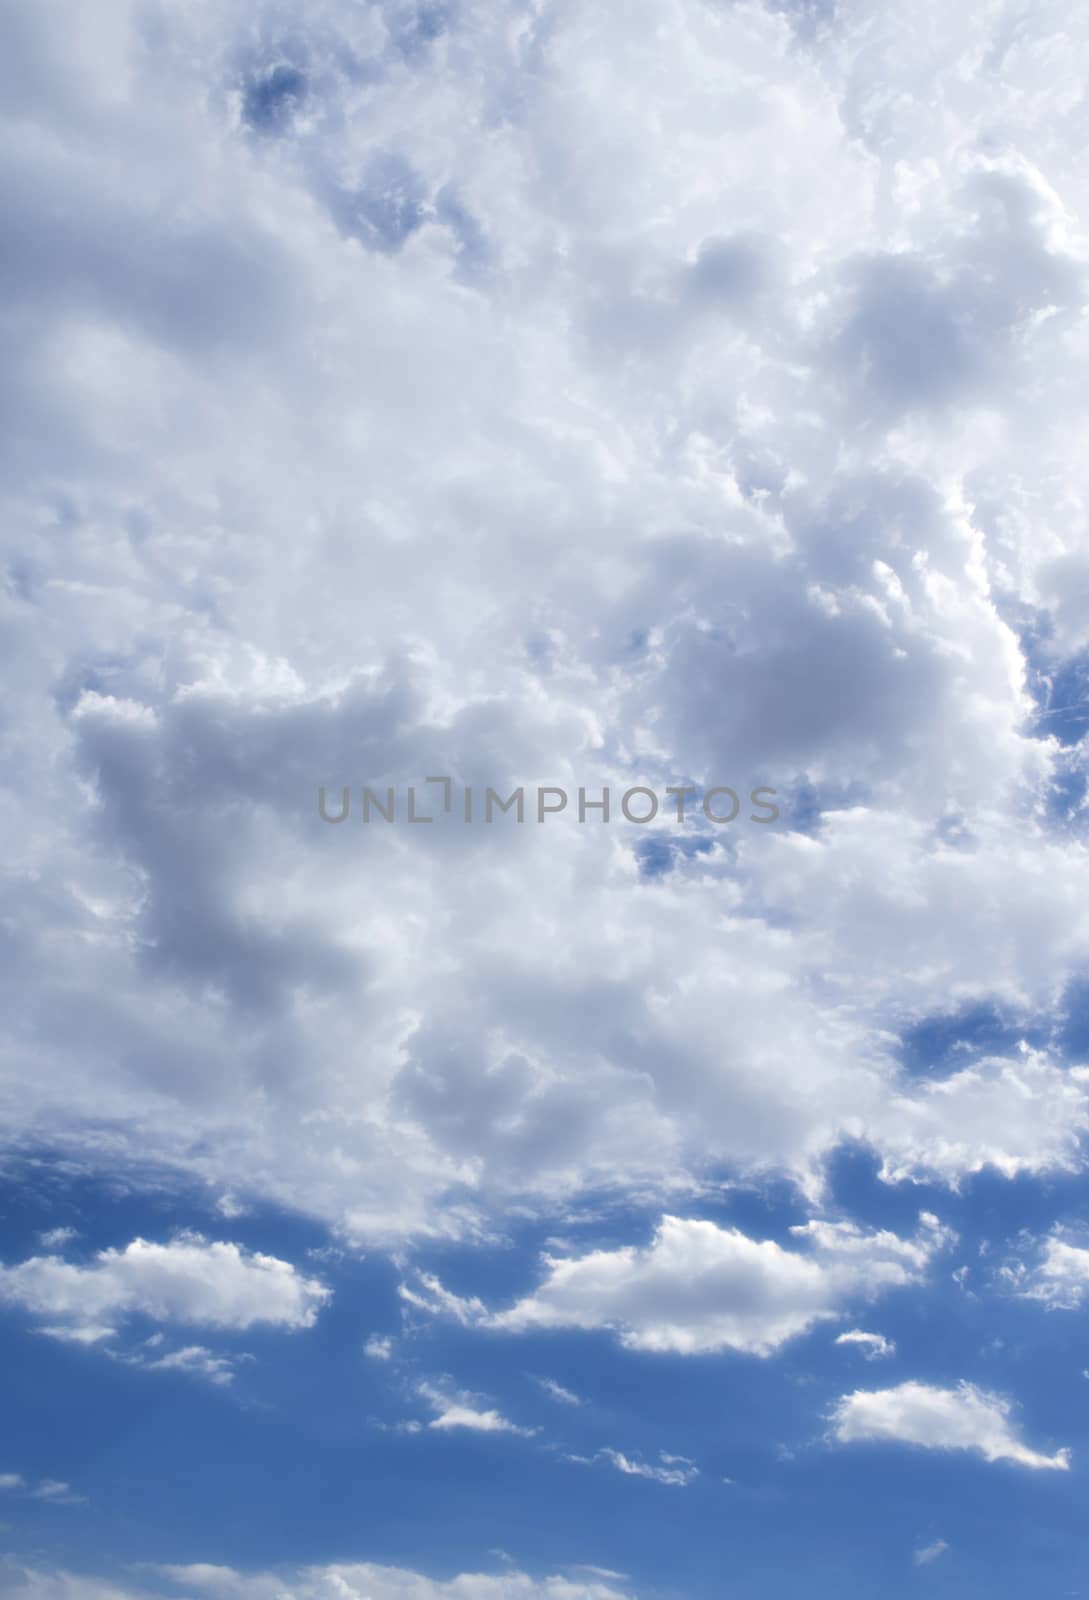 The Fluffy Cloudy Blue Sky Scape 101